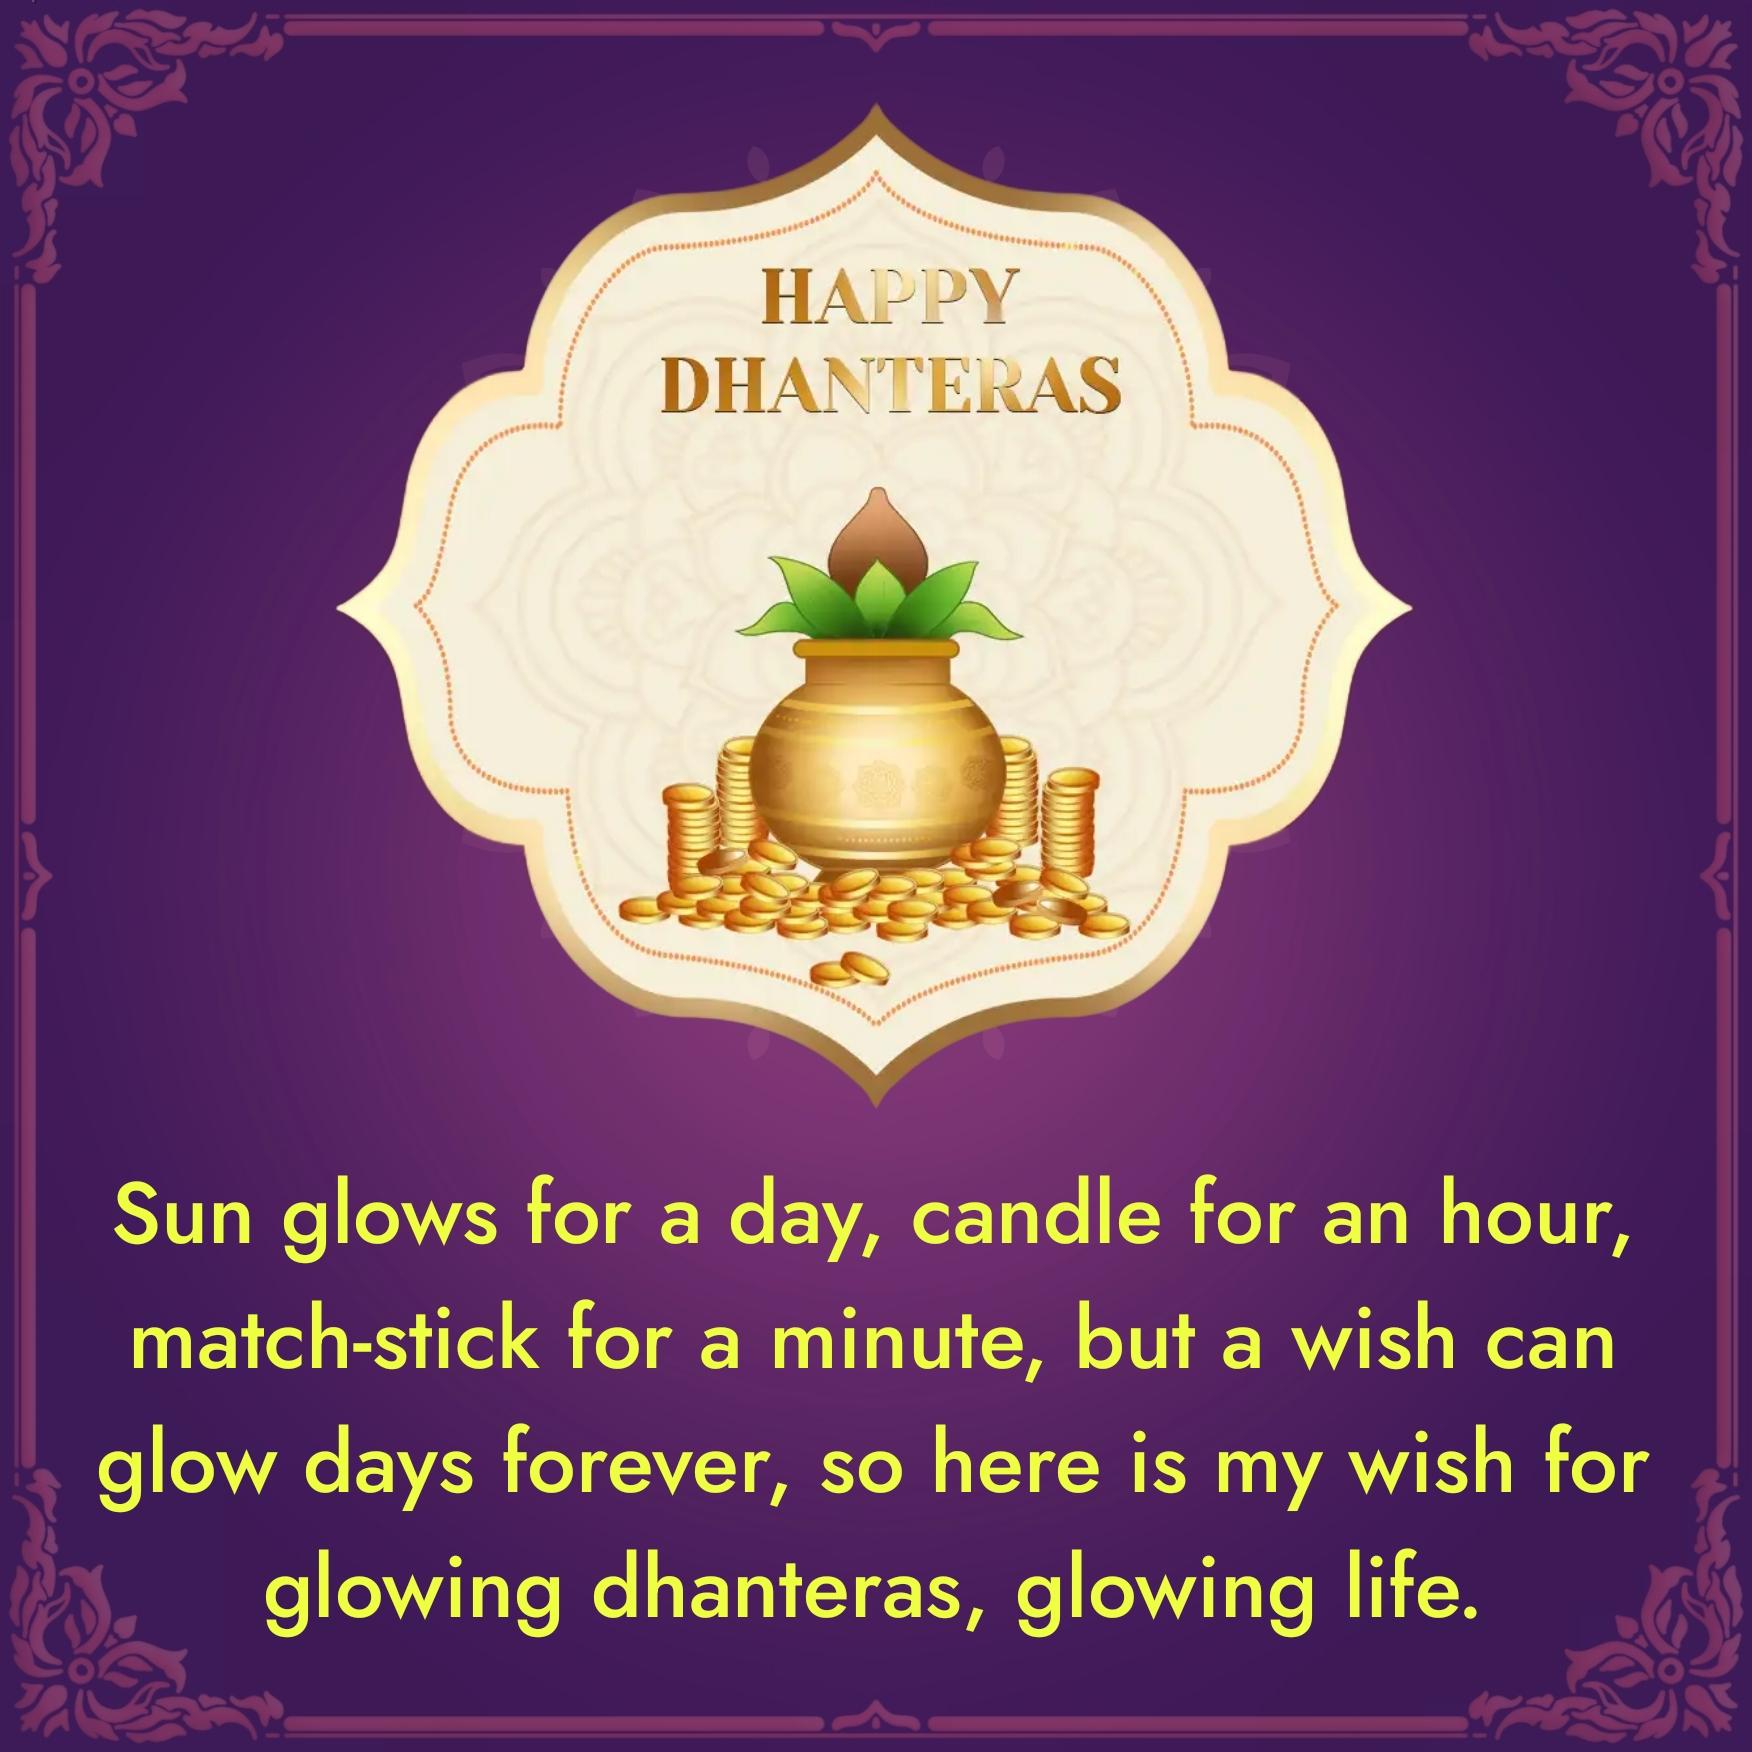 Sun glows for a day candle for an hour